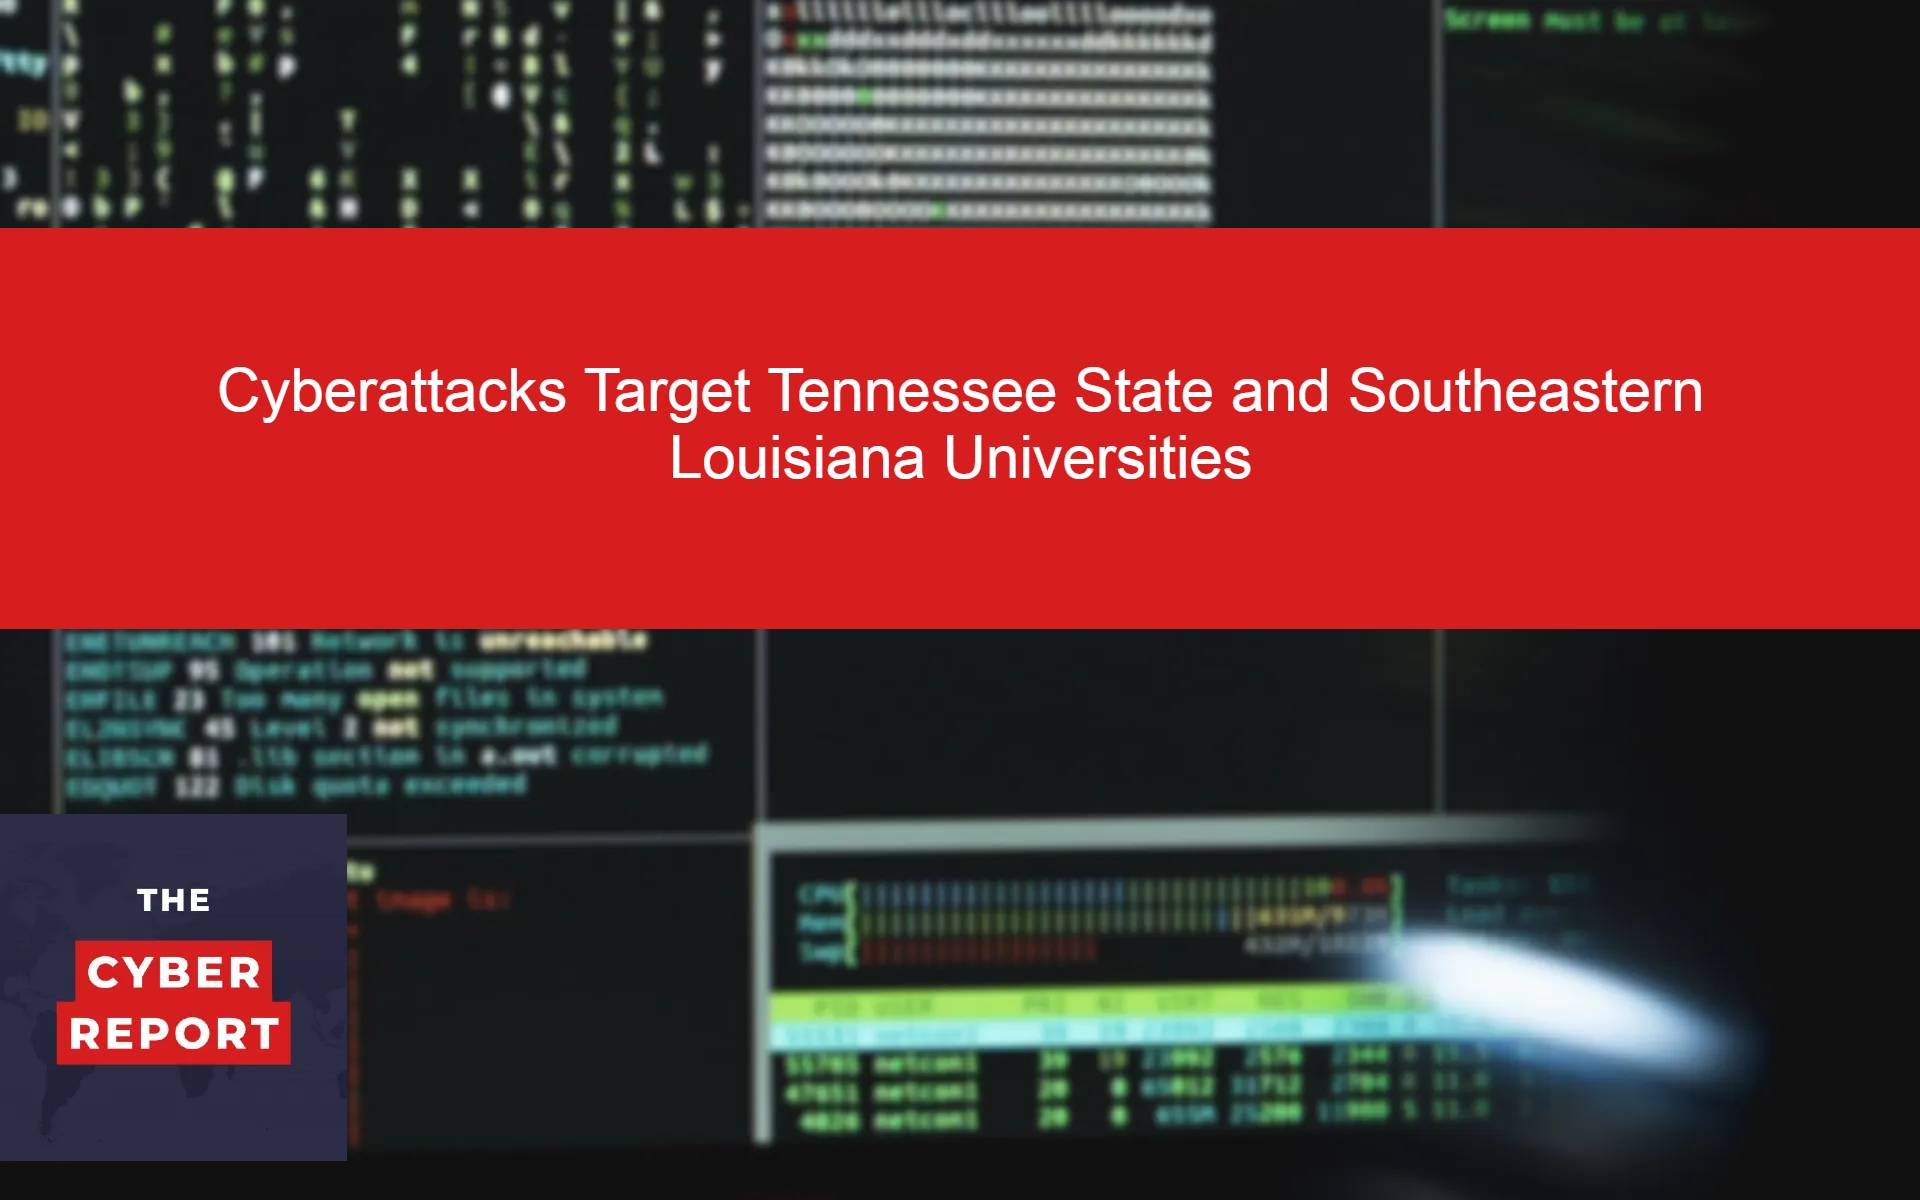 Cyberattacks Target Tennessee State and Southeastern Louisiana Universities